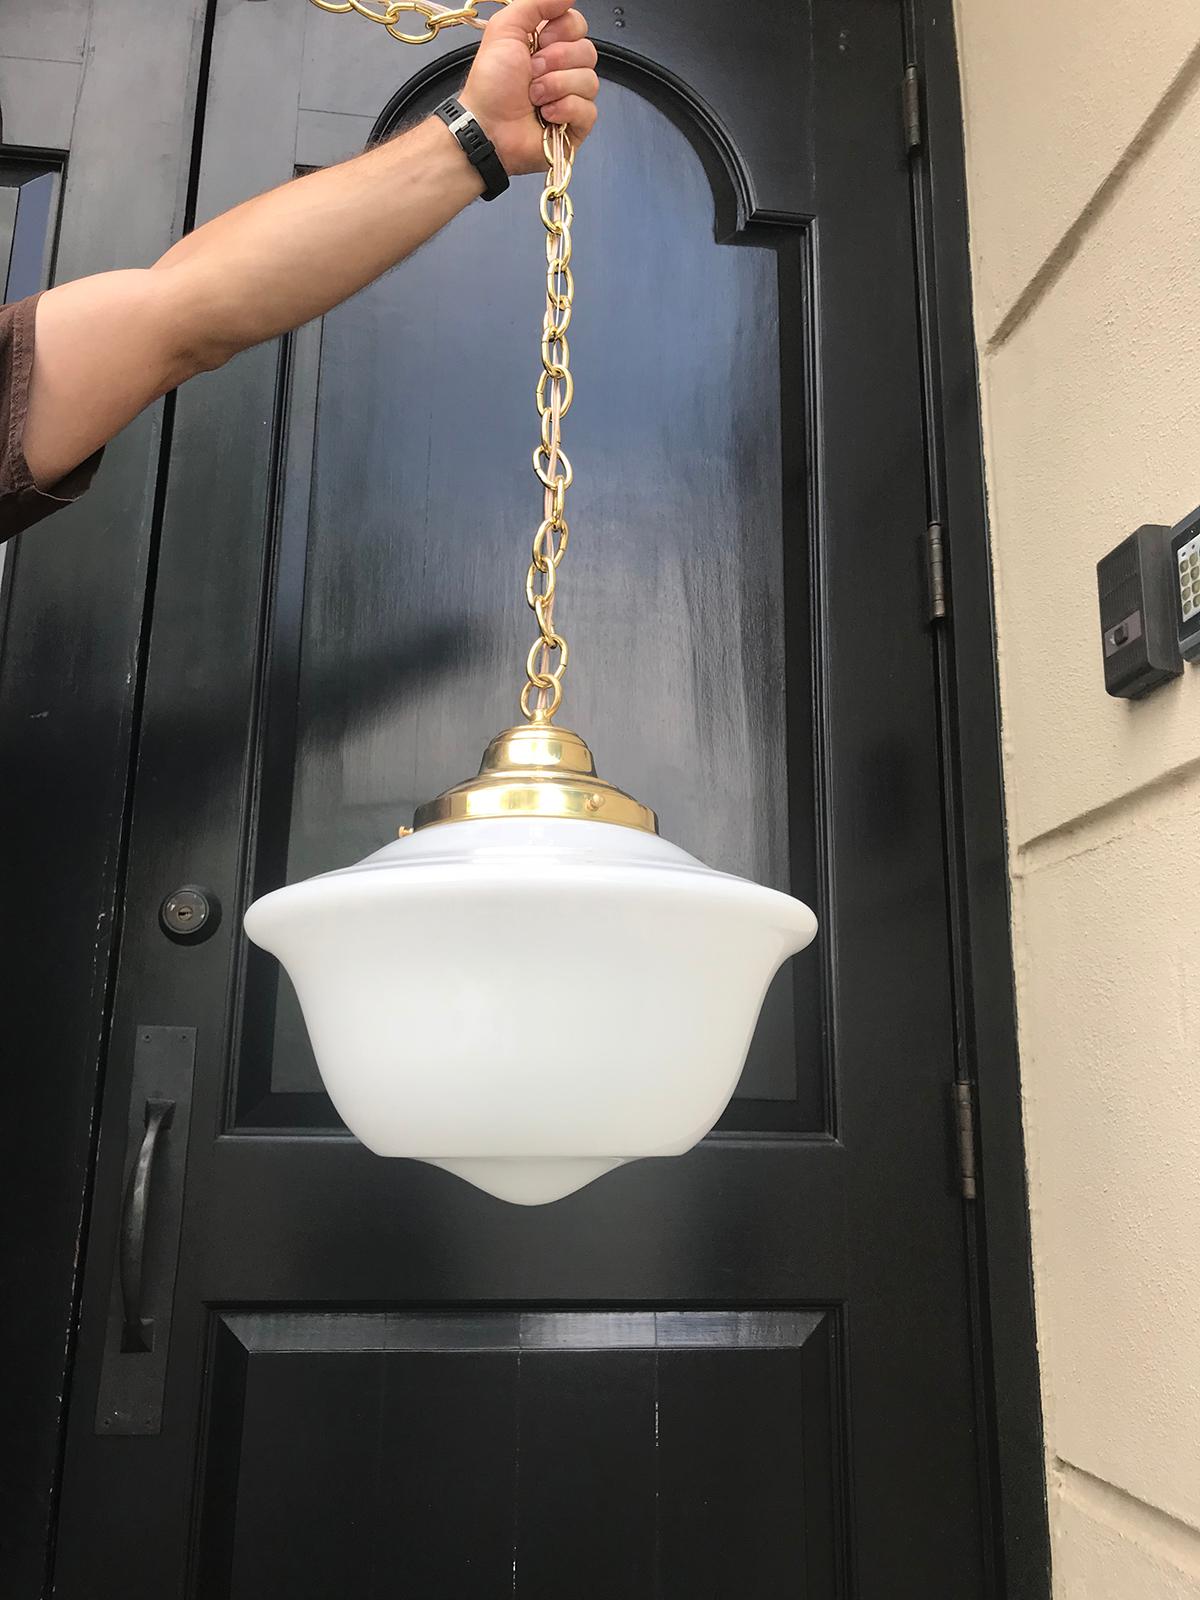 Pair of 20th century American milk glass pendant and brass hanging light fixtures.